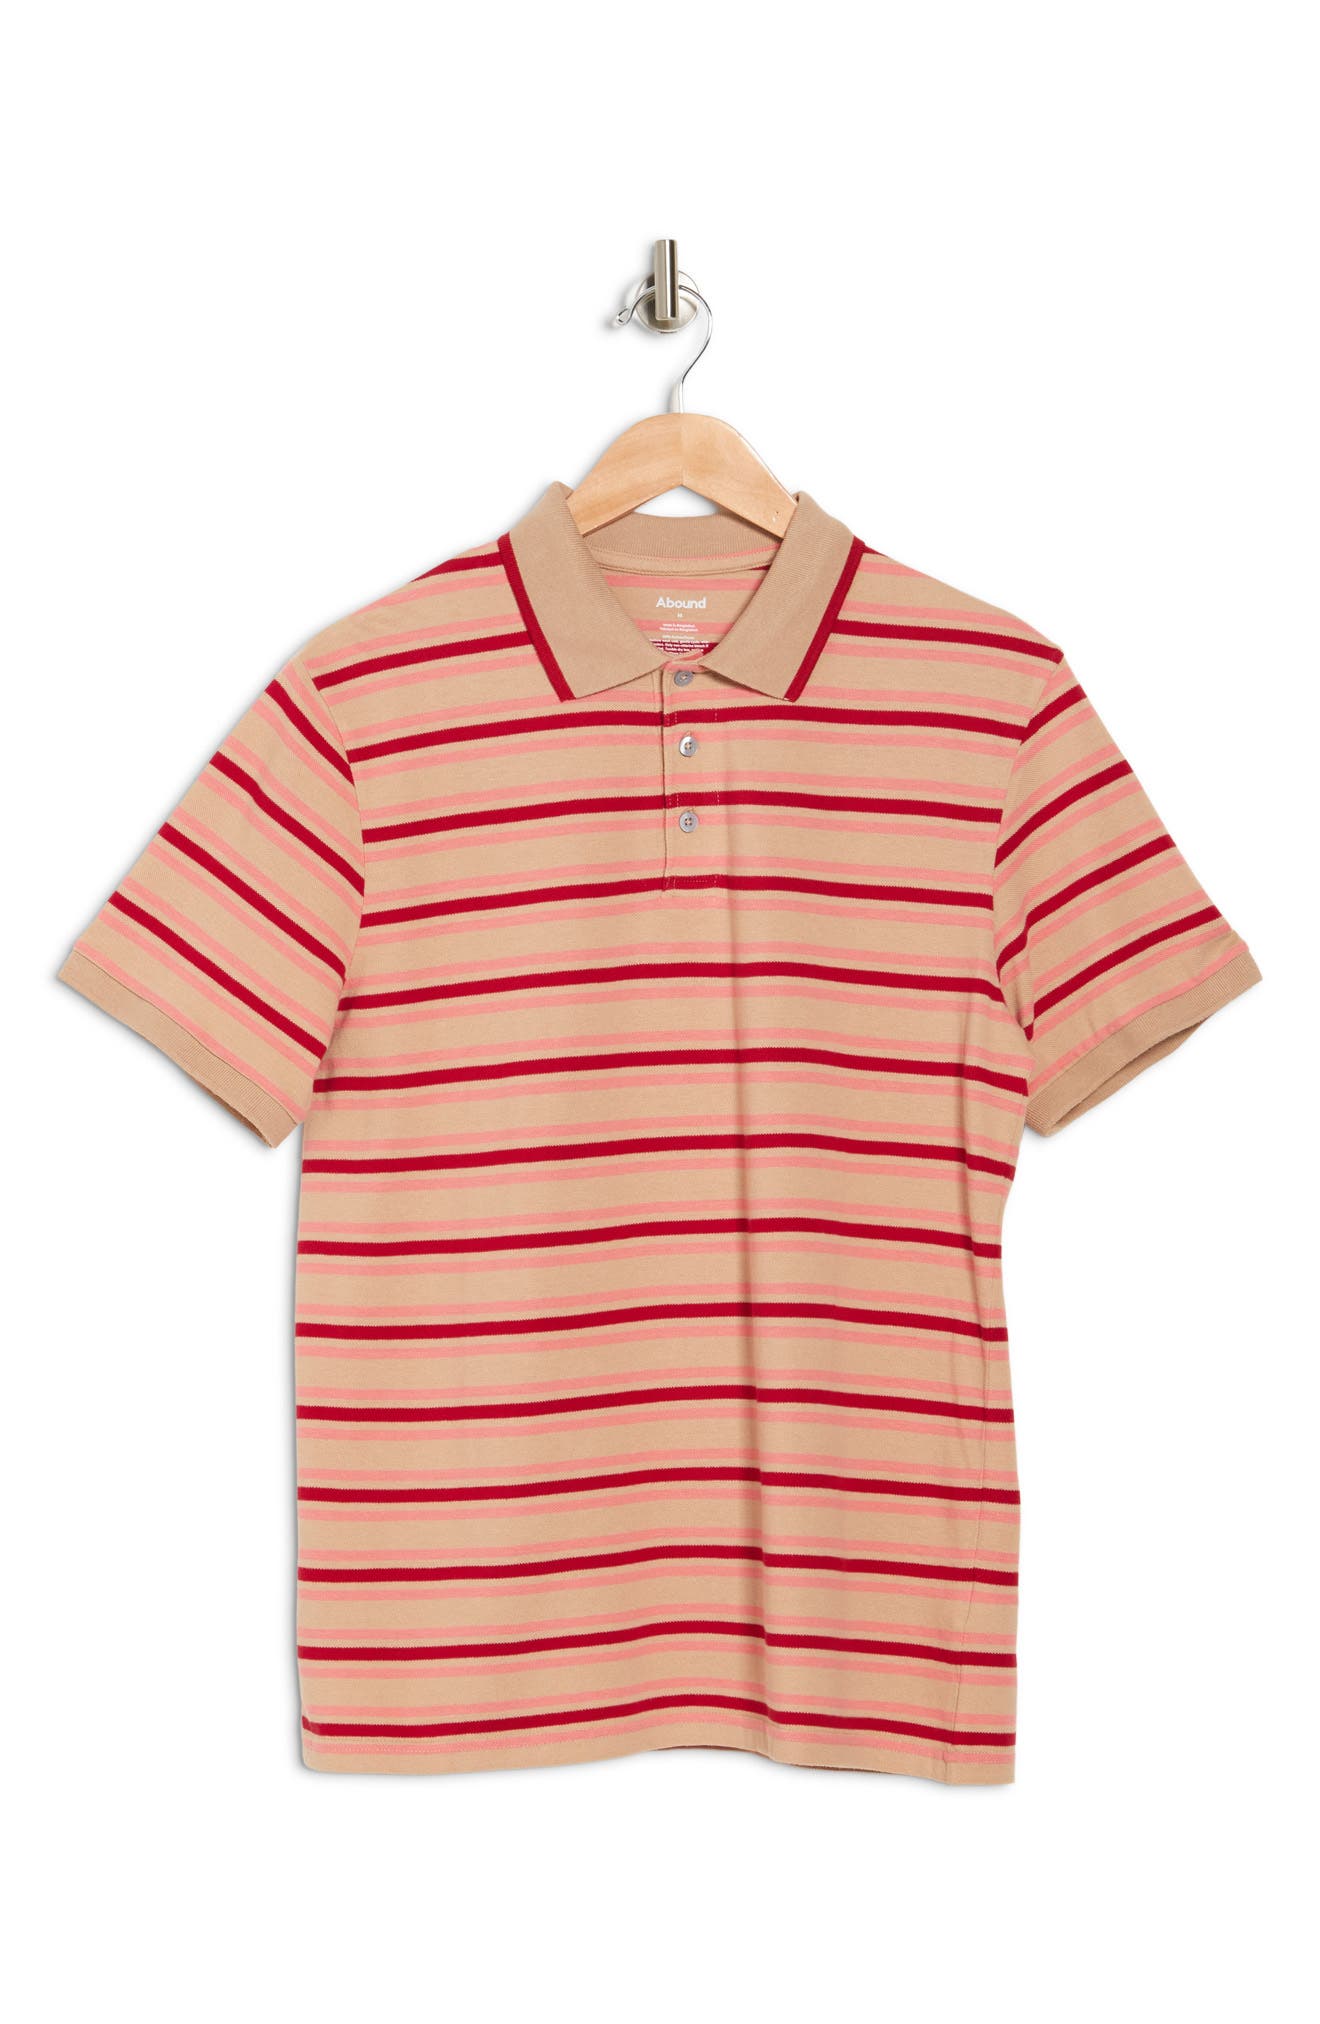 Abound Short Sleeve Polo Shirt In Tan Nomad Stripe